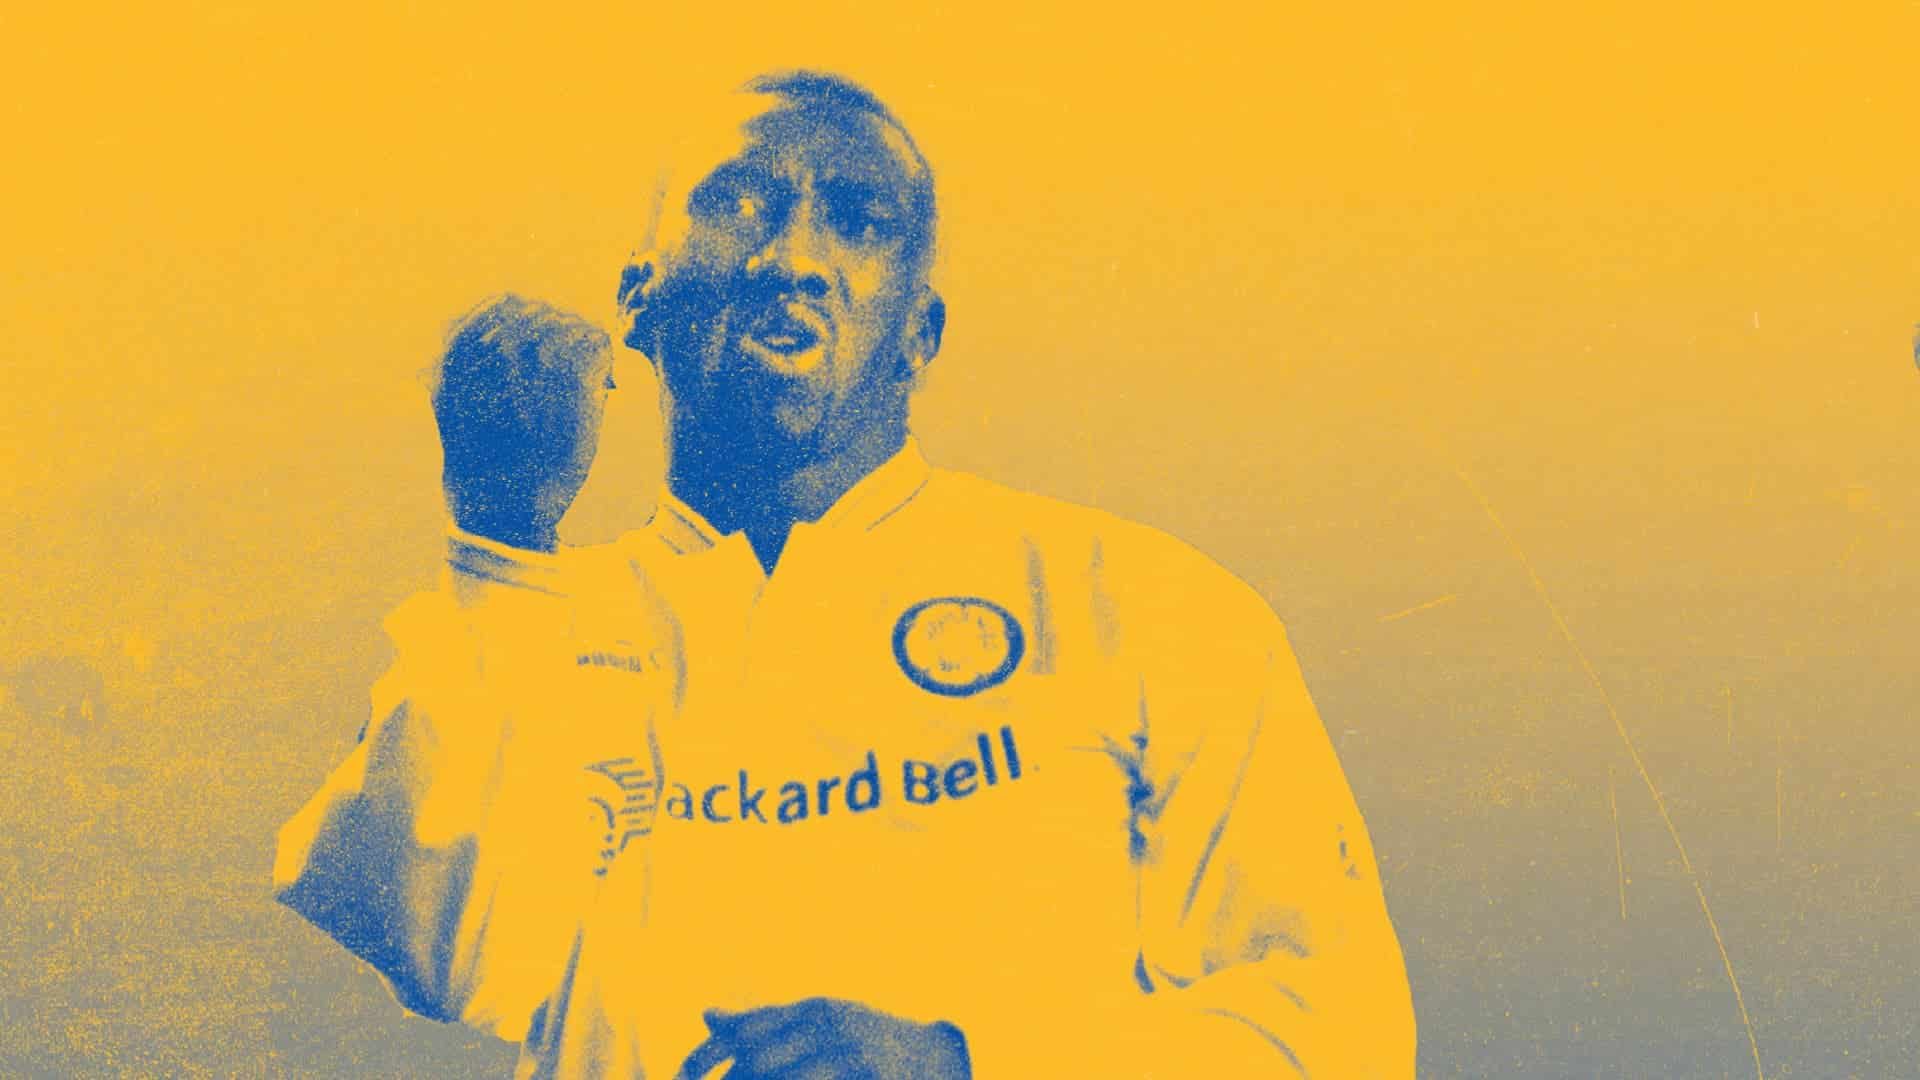 Jimmy Floyd Hasselbaink shaking his first in celebration, either that or he's calling someone a wanker